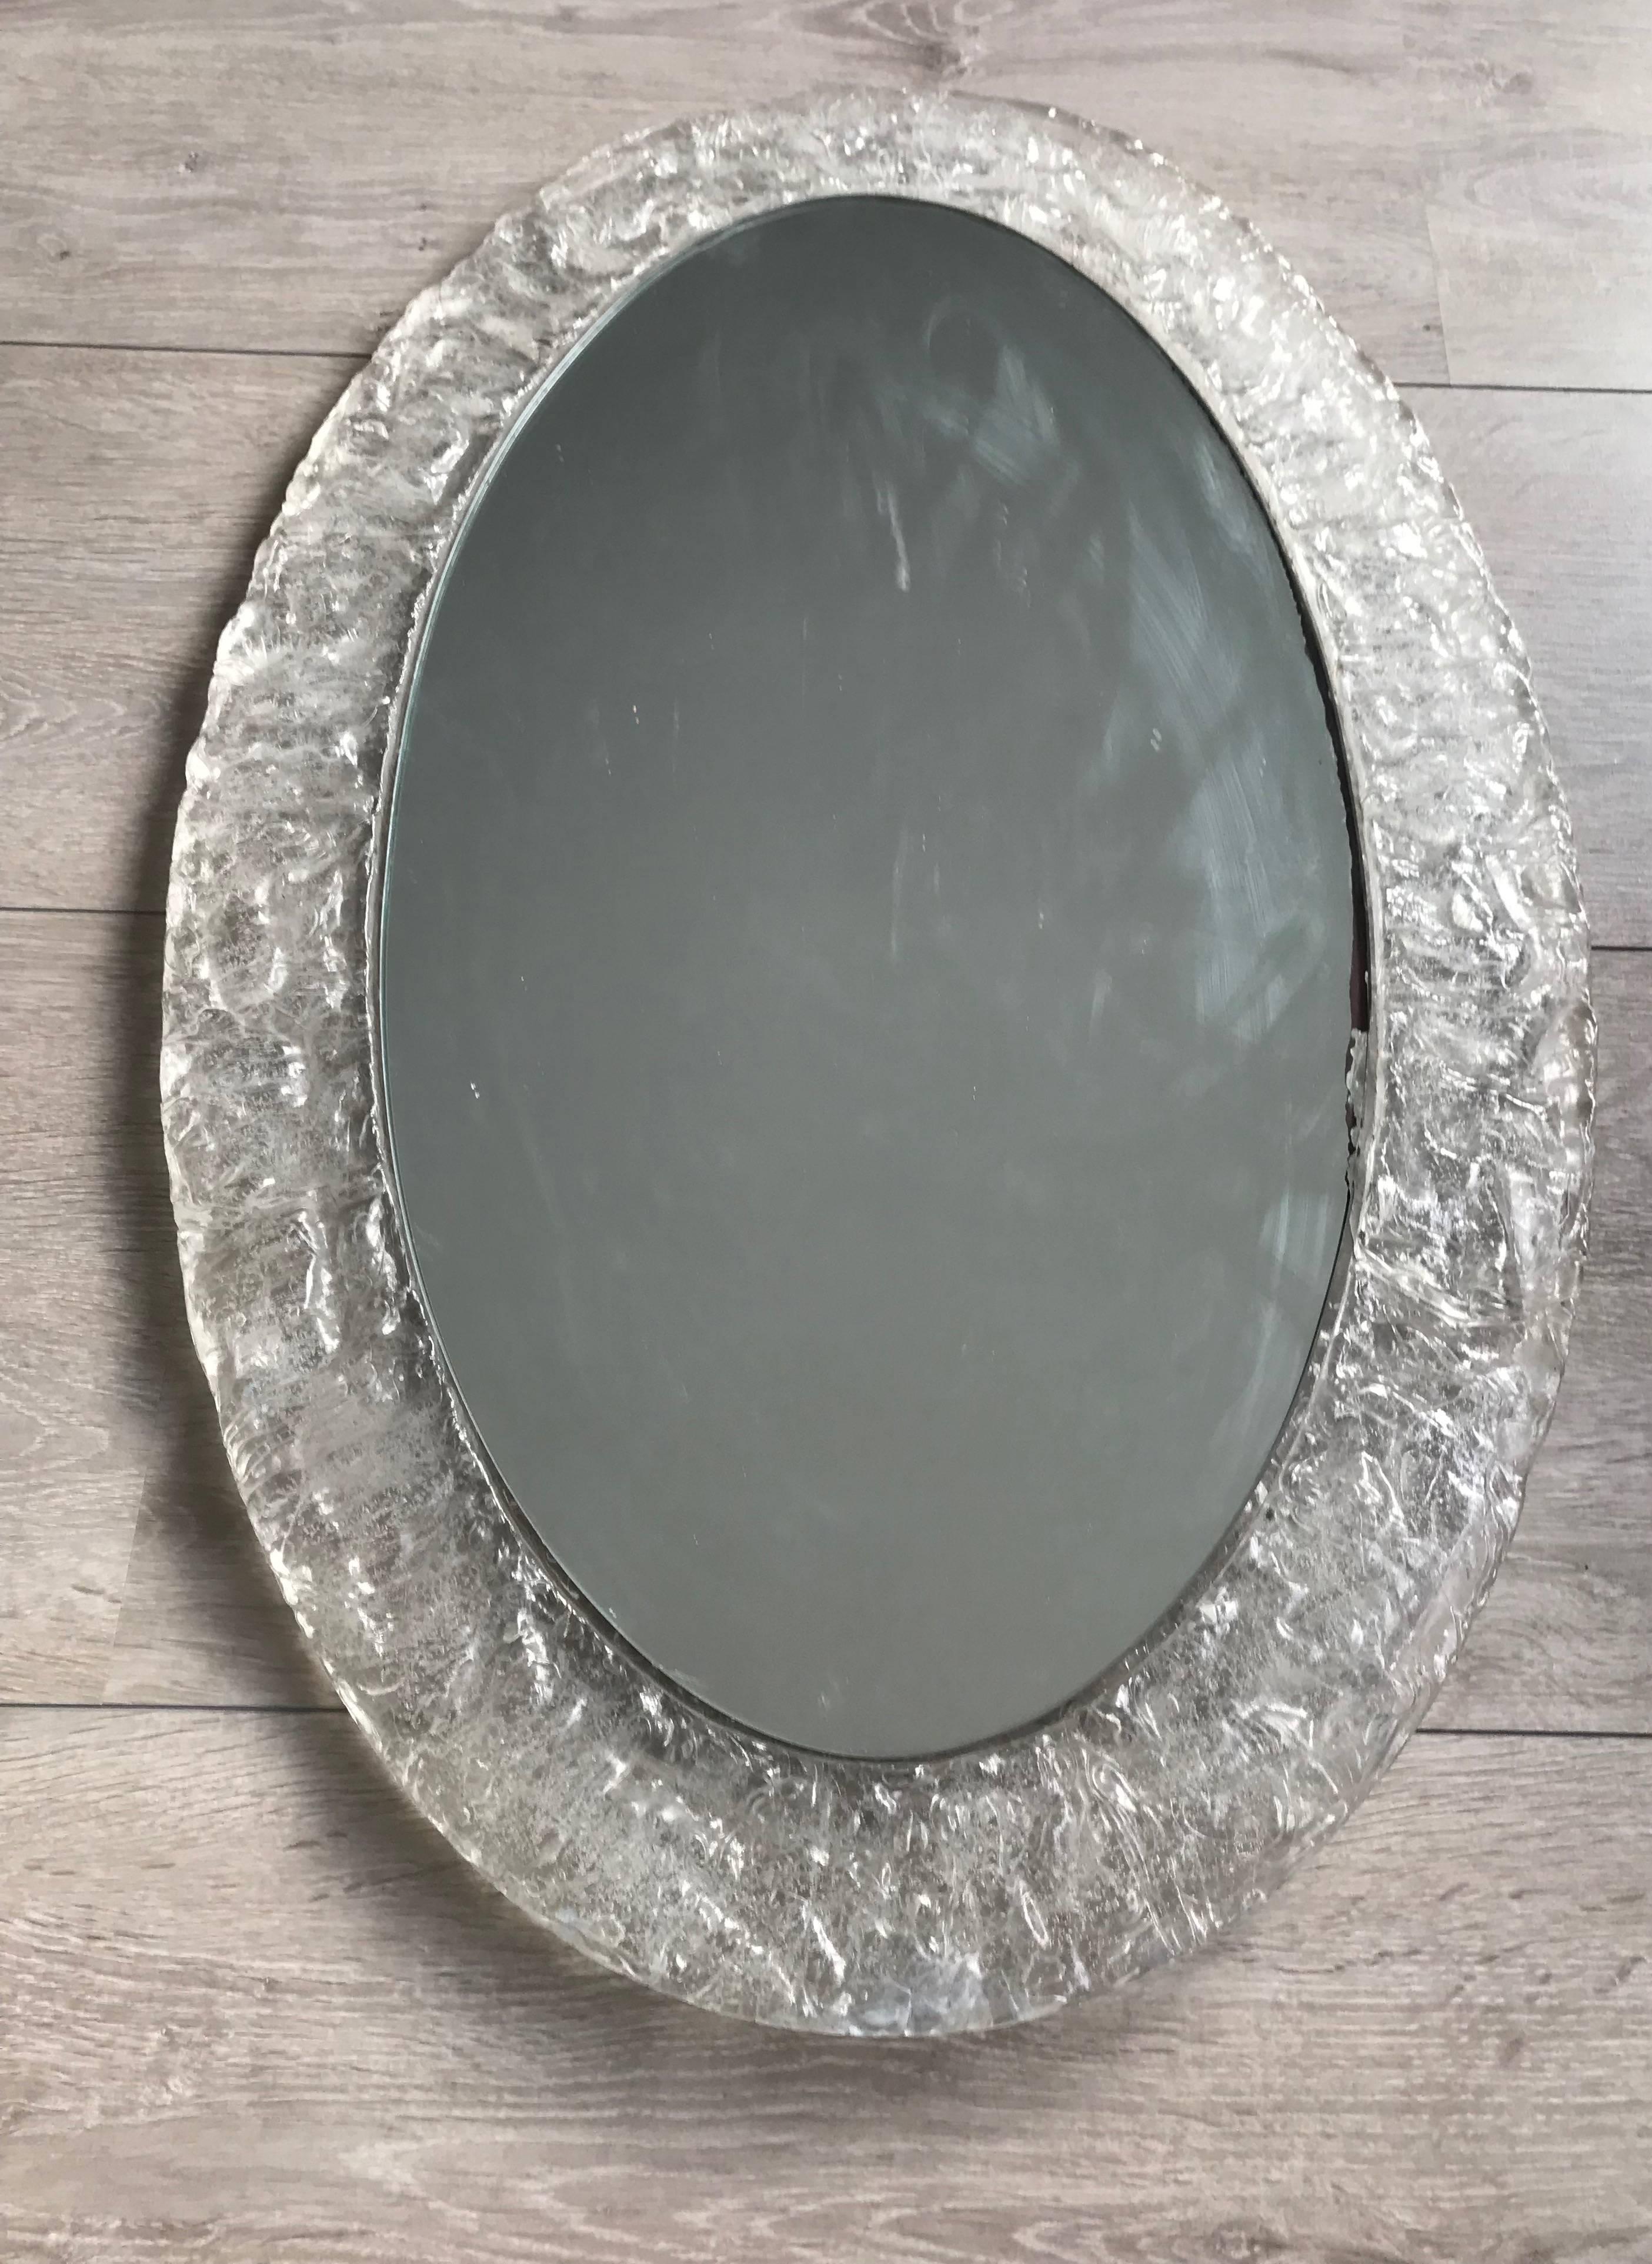 European Rare Midcentury Design Oval Mirror in Faux Glass Frame with Frosted Ice Pattern For Sale